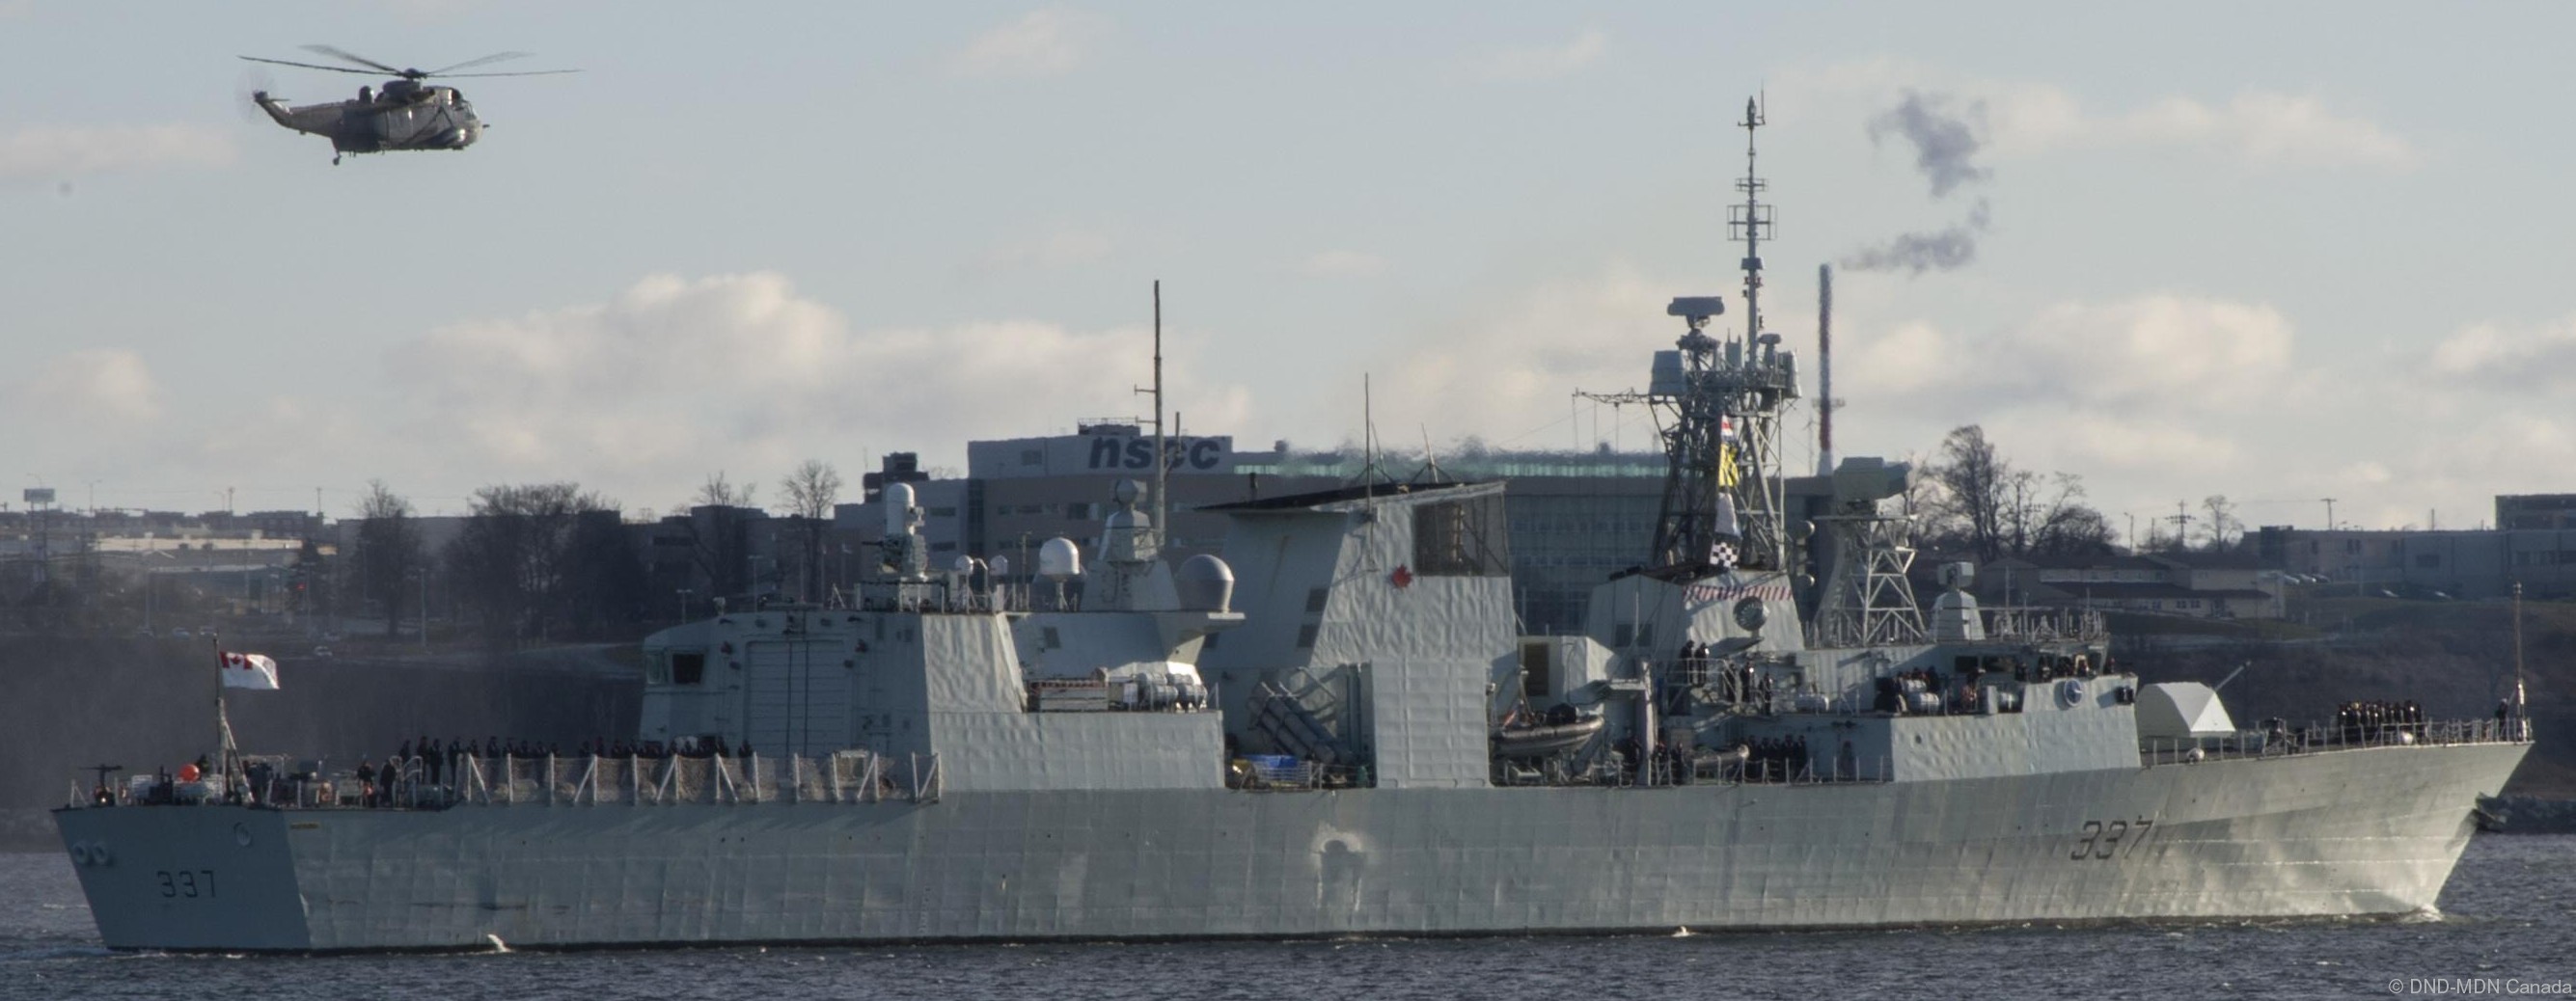 ffh-337 hmcs fredericton halifax class helicopter patrol frigate ncsm royal canadian navy 24